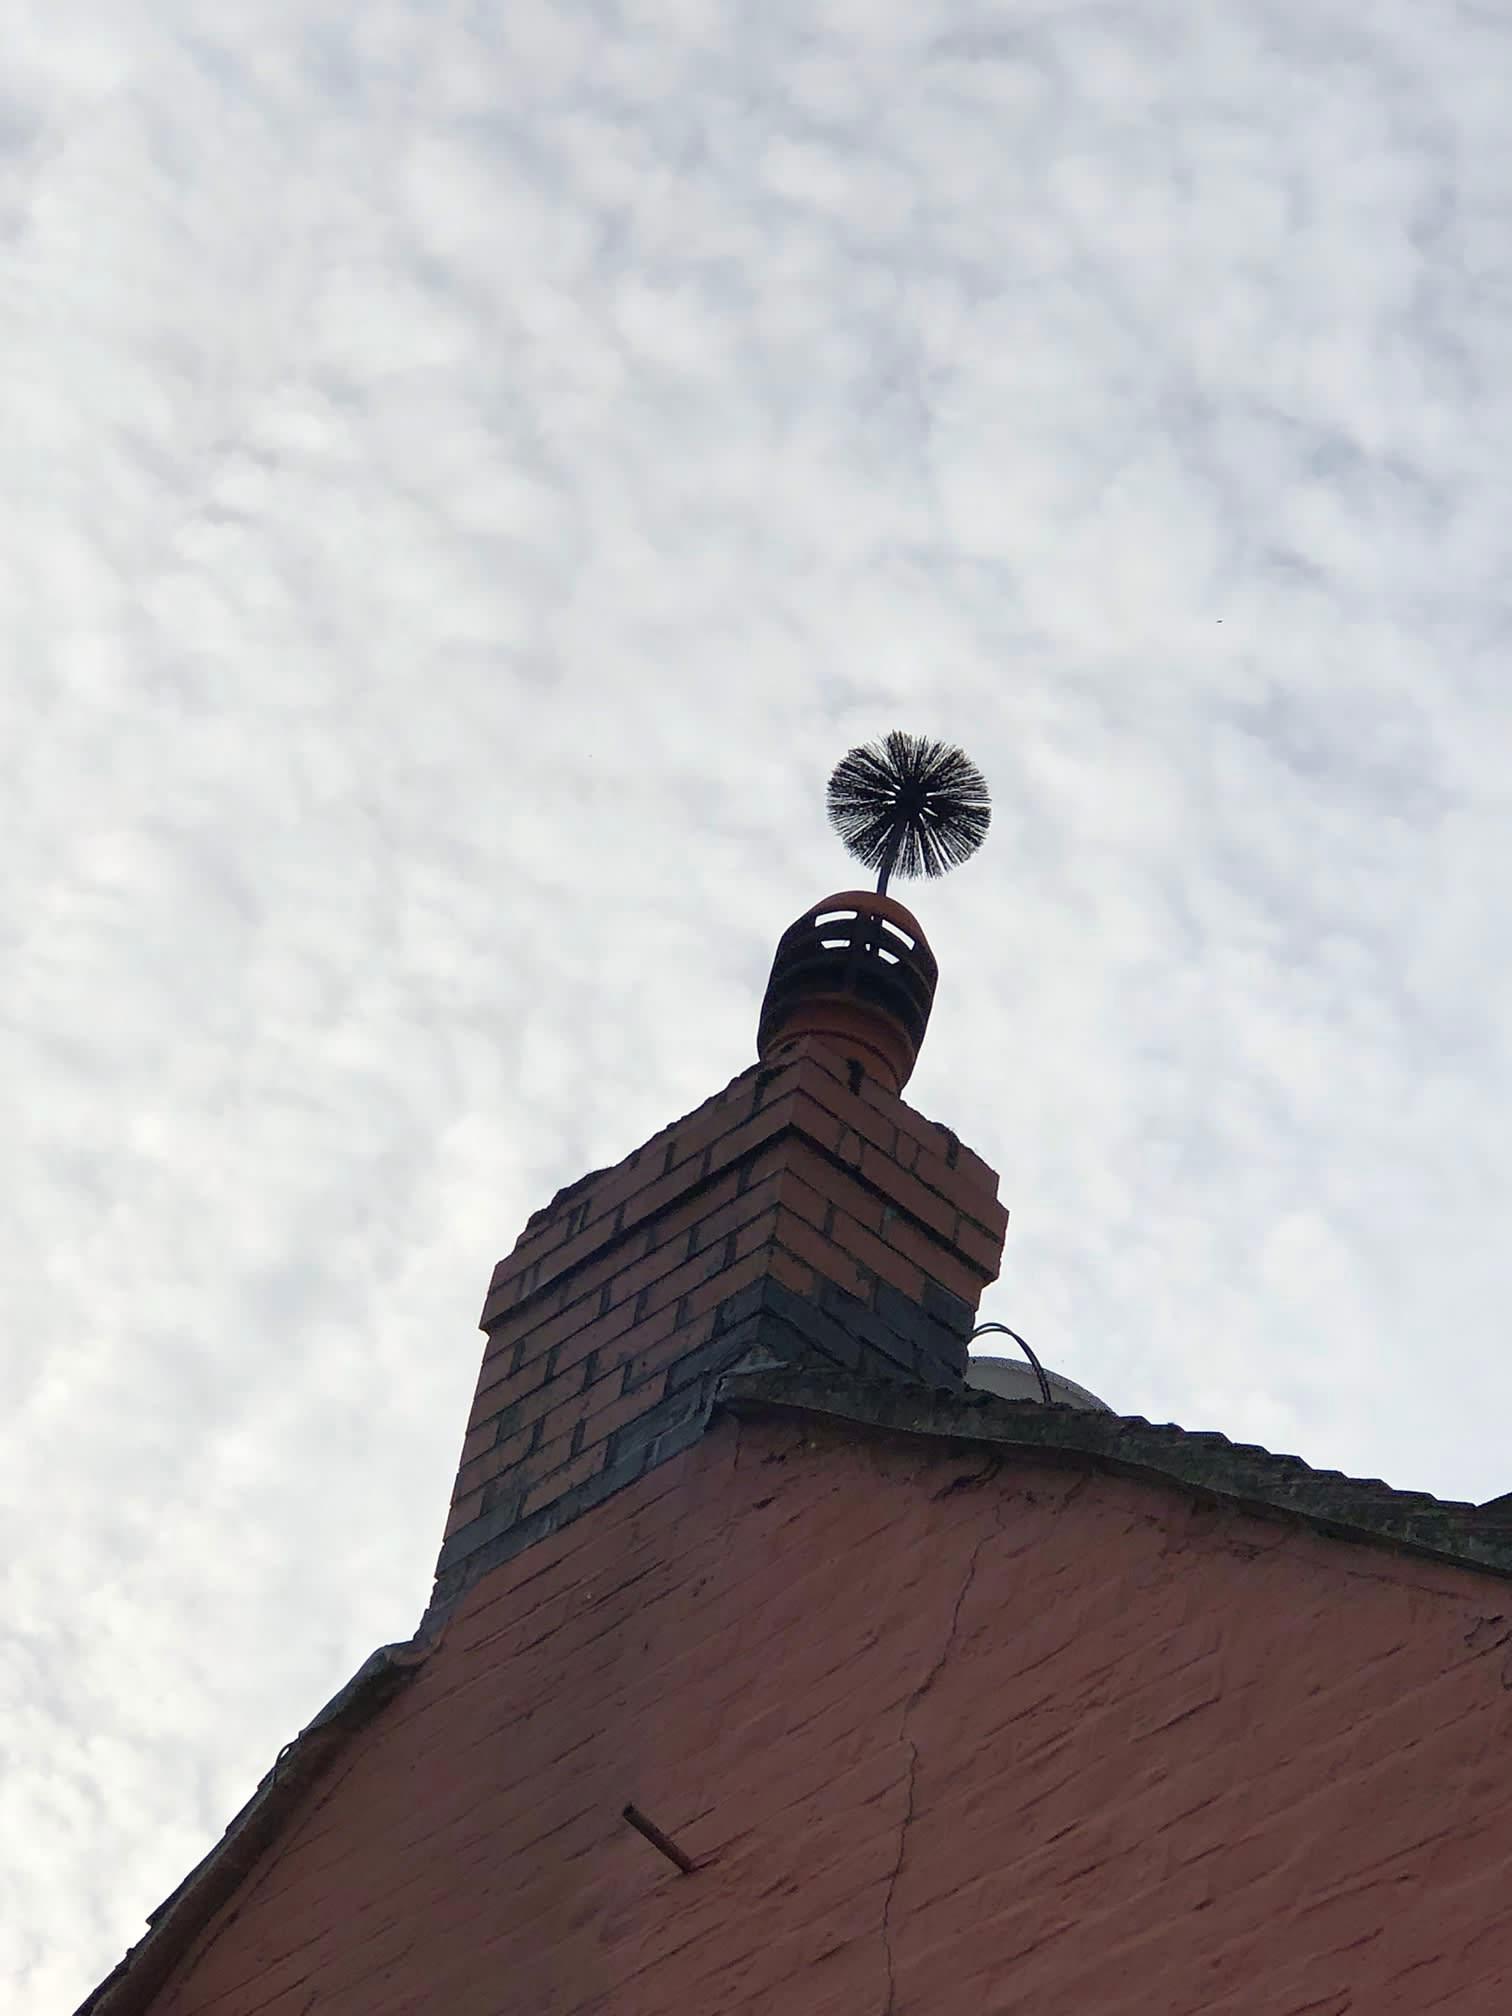 Images Phil's Chimney Sweep